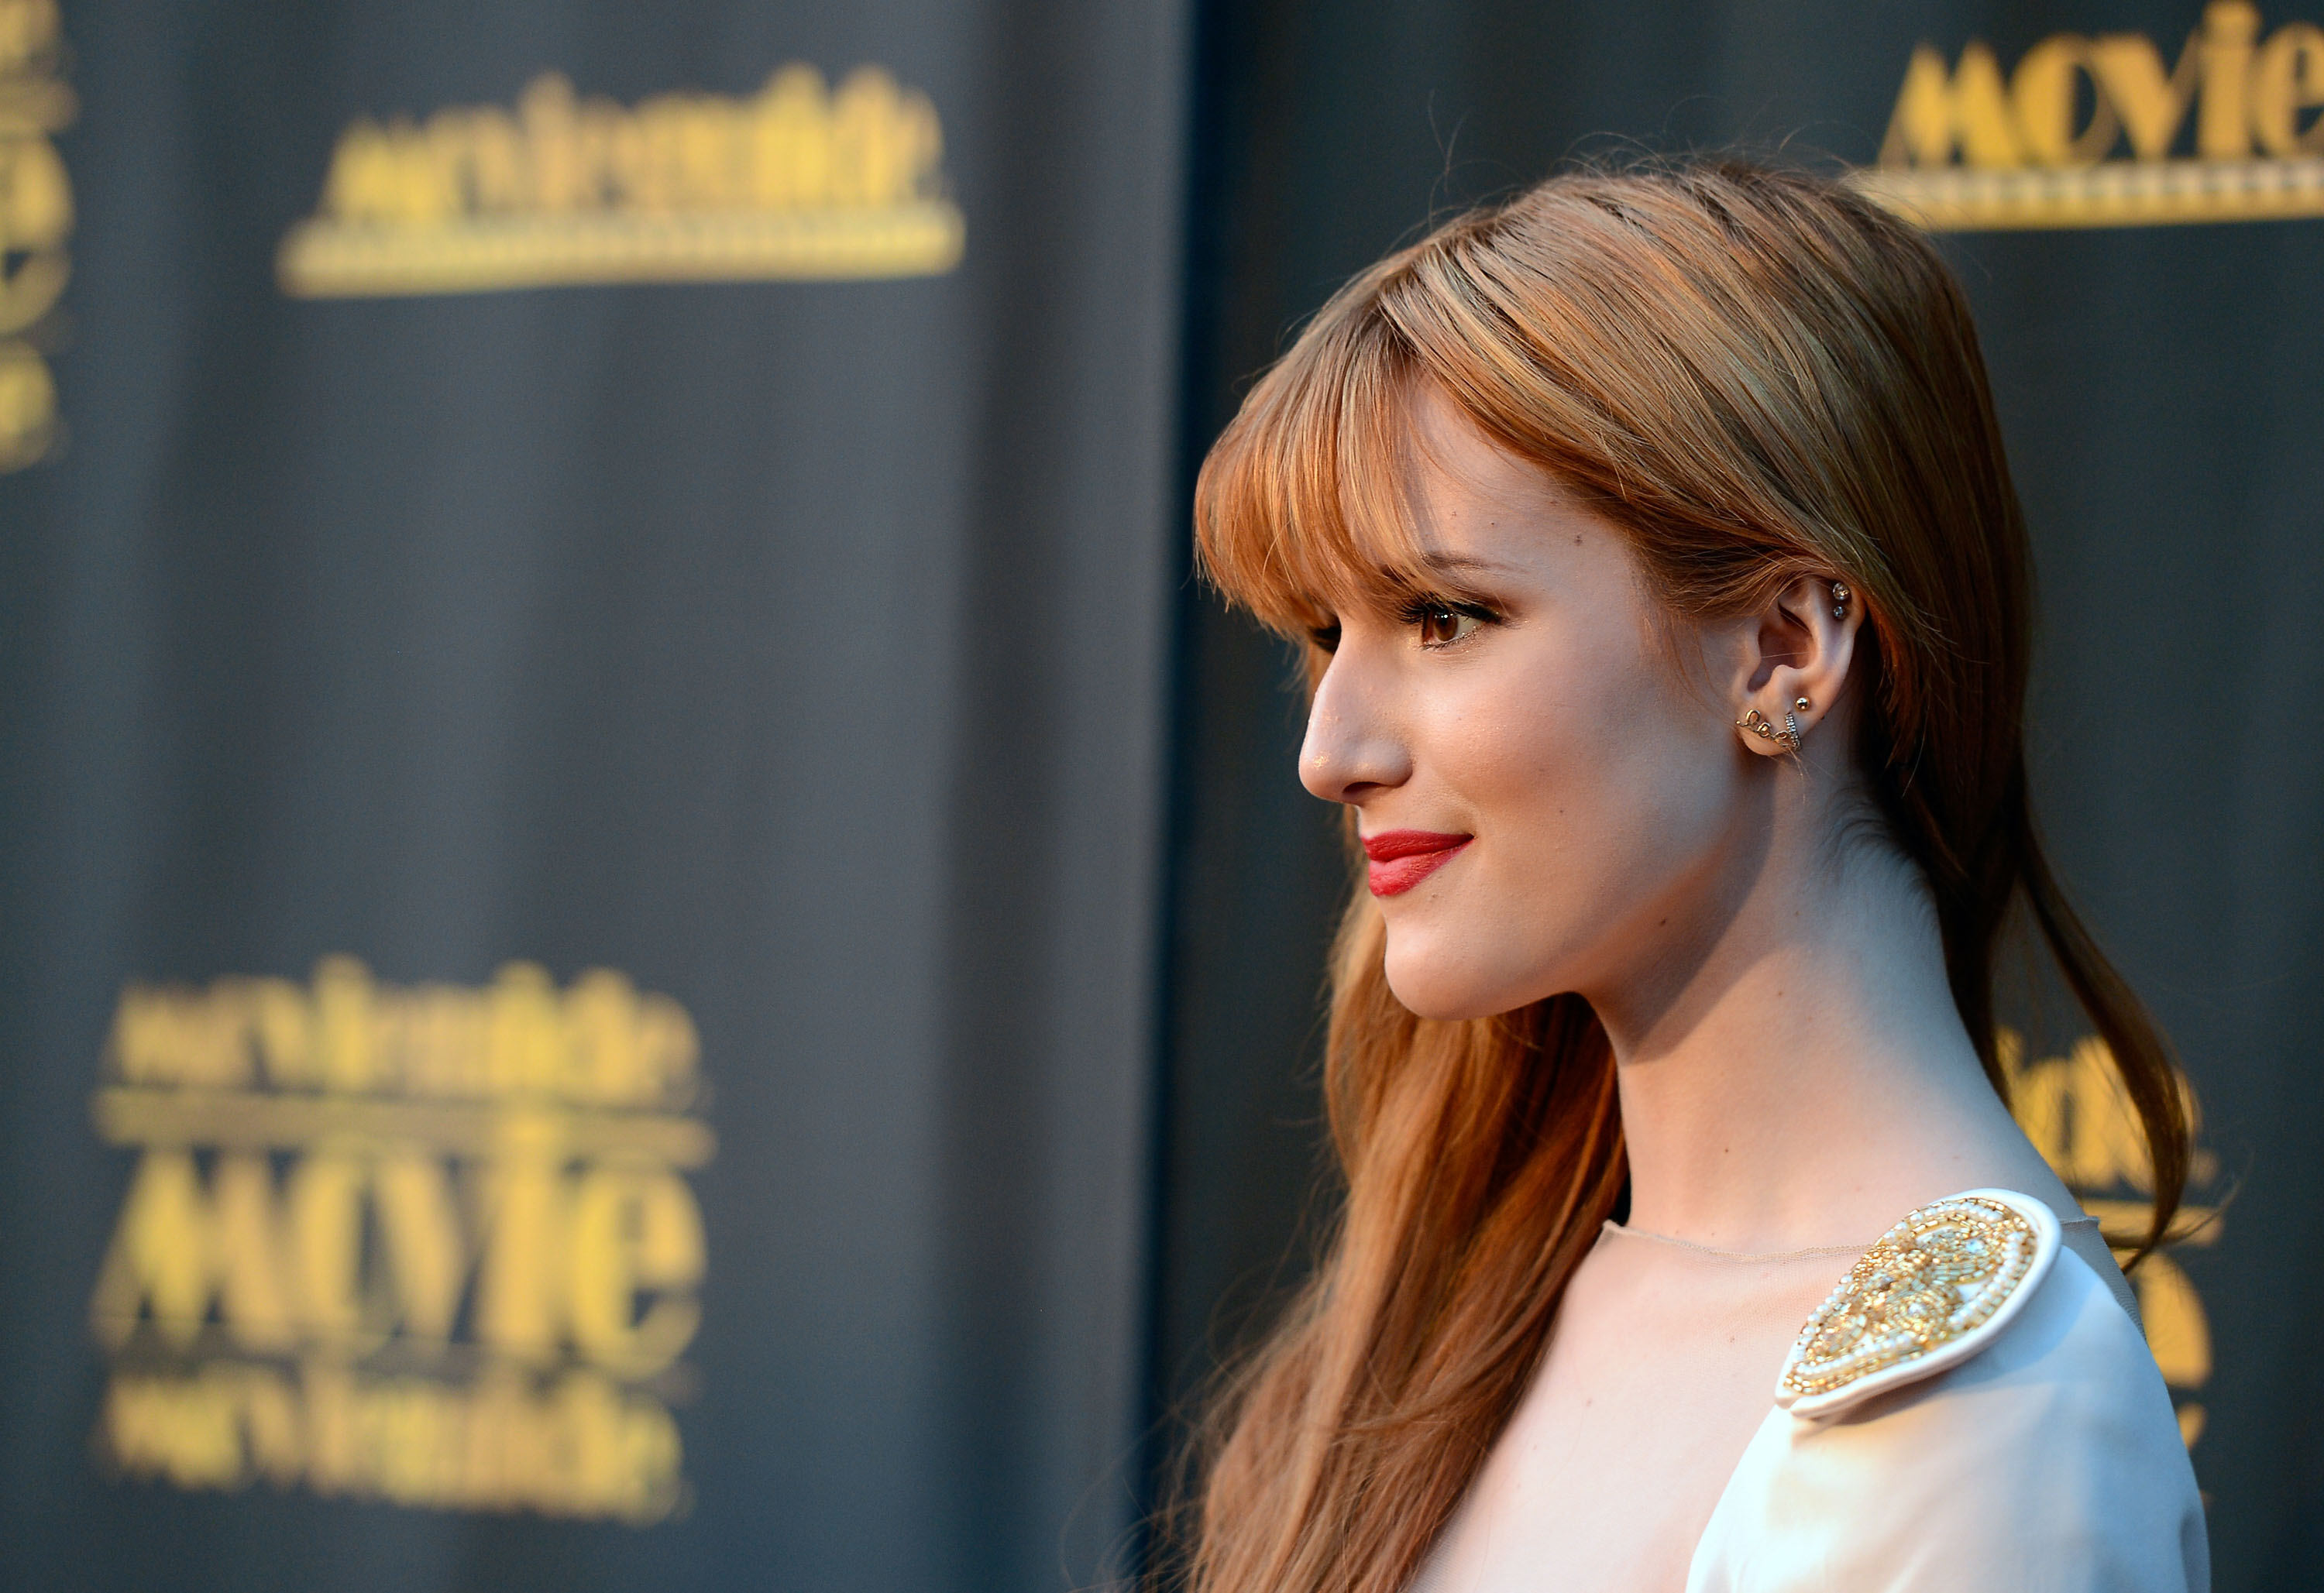 High Quality pictures of the stunning teen actress Bella Thorne. 